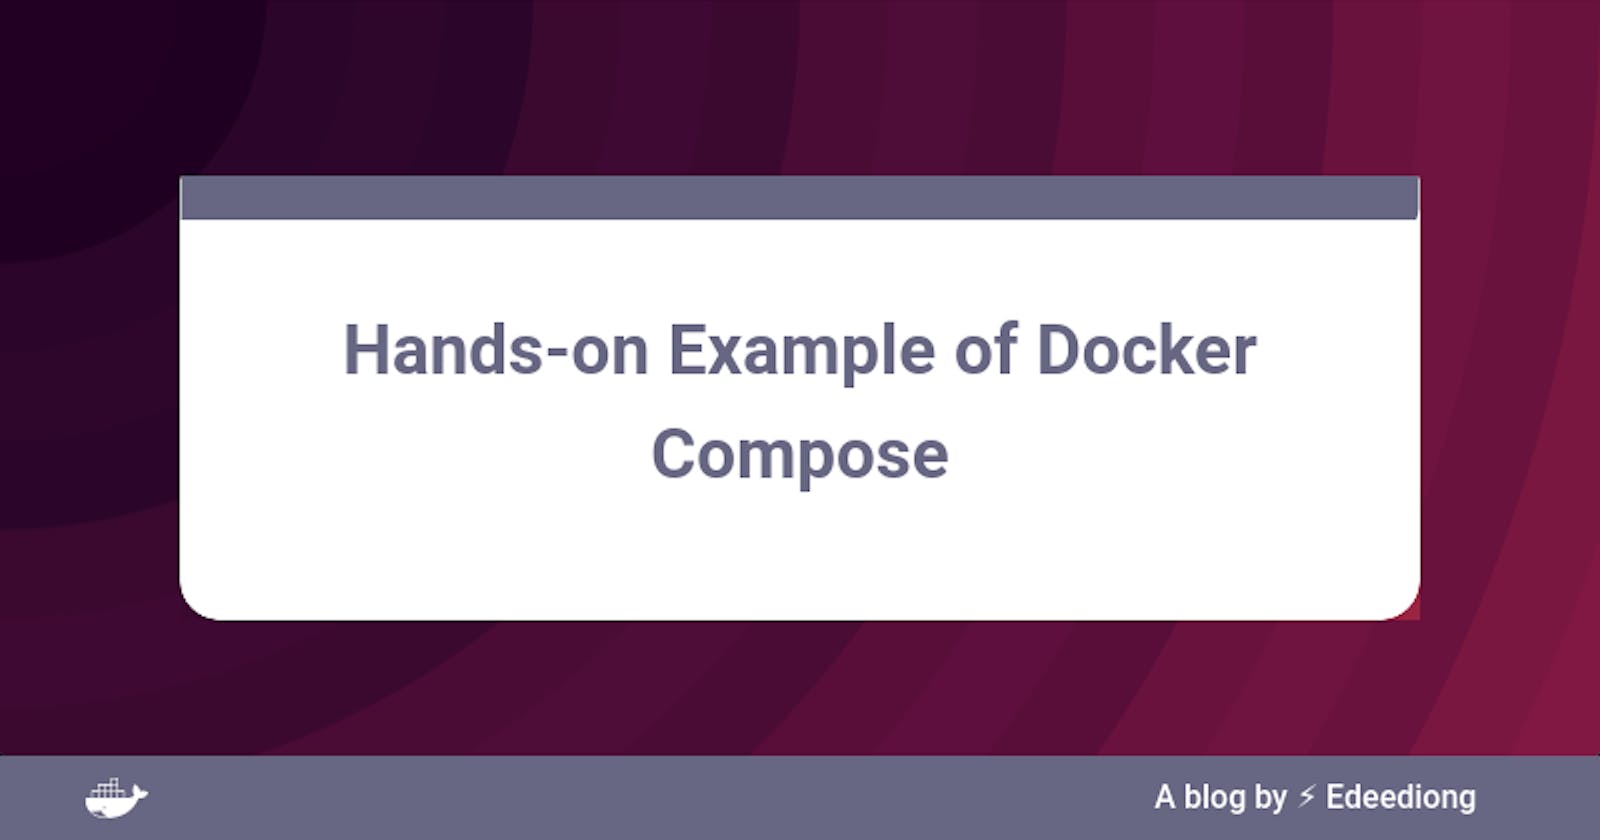 Hands-on Example of Docker Compose